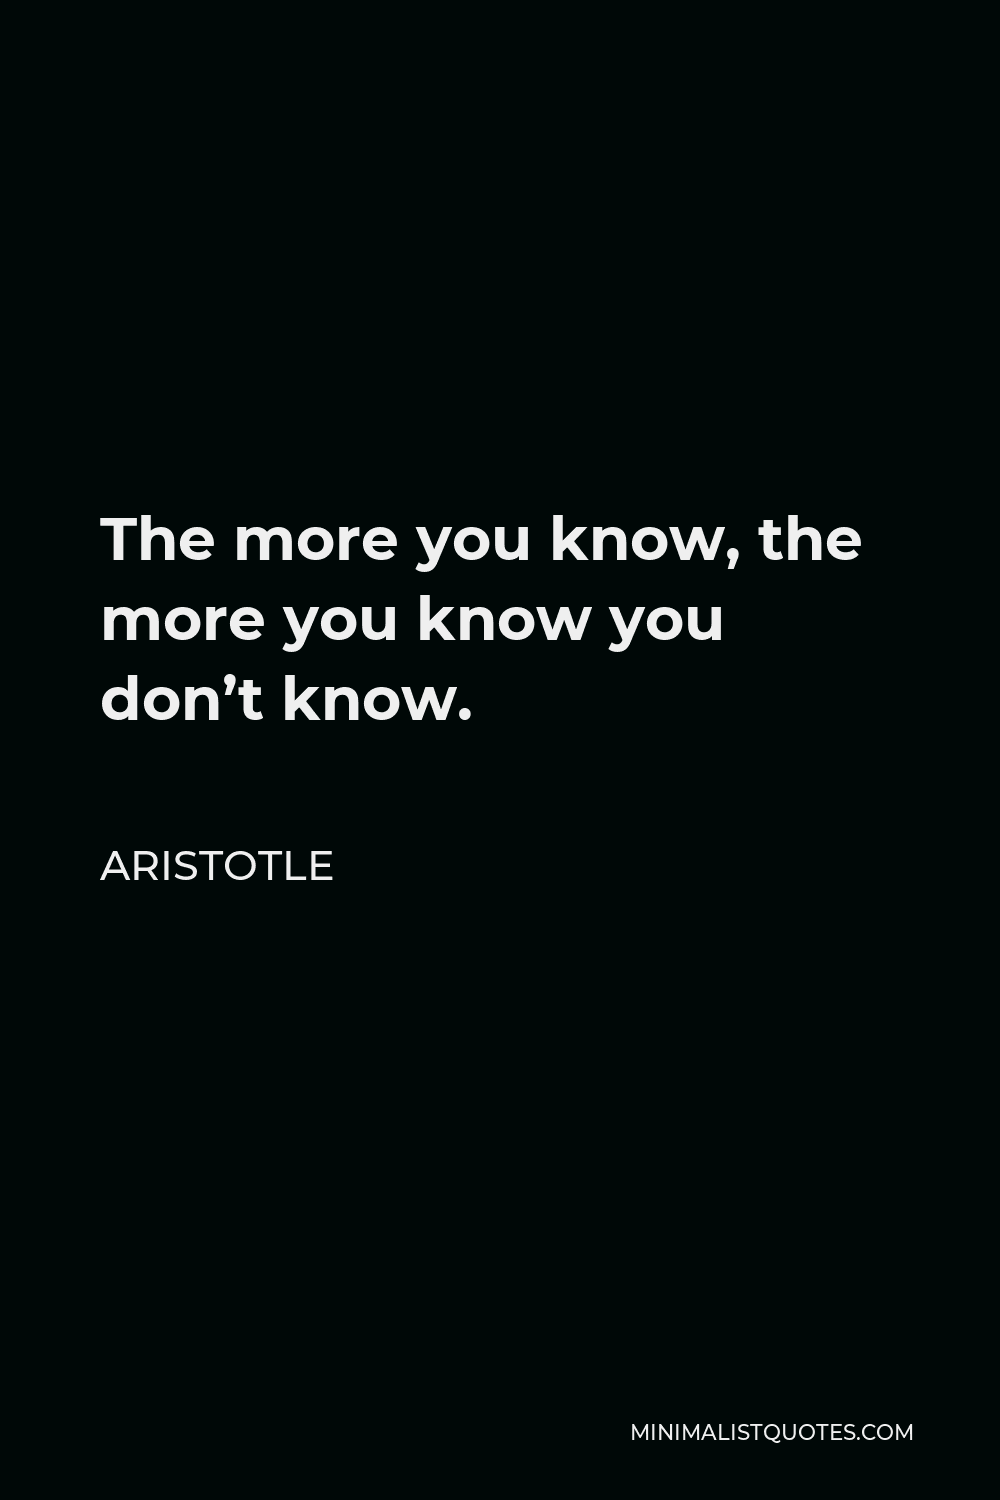 Aristotle Quote - The more you know, the more you know you don’t know.